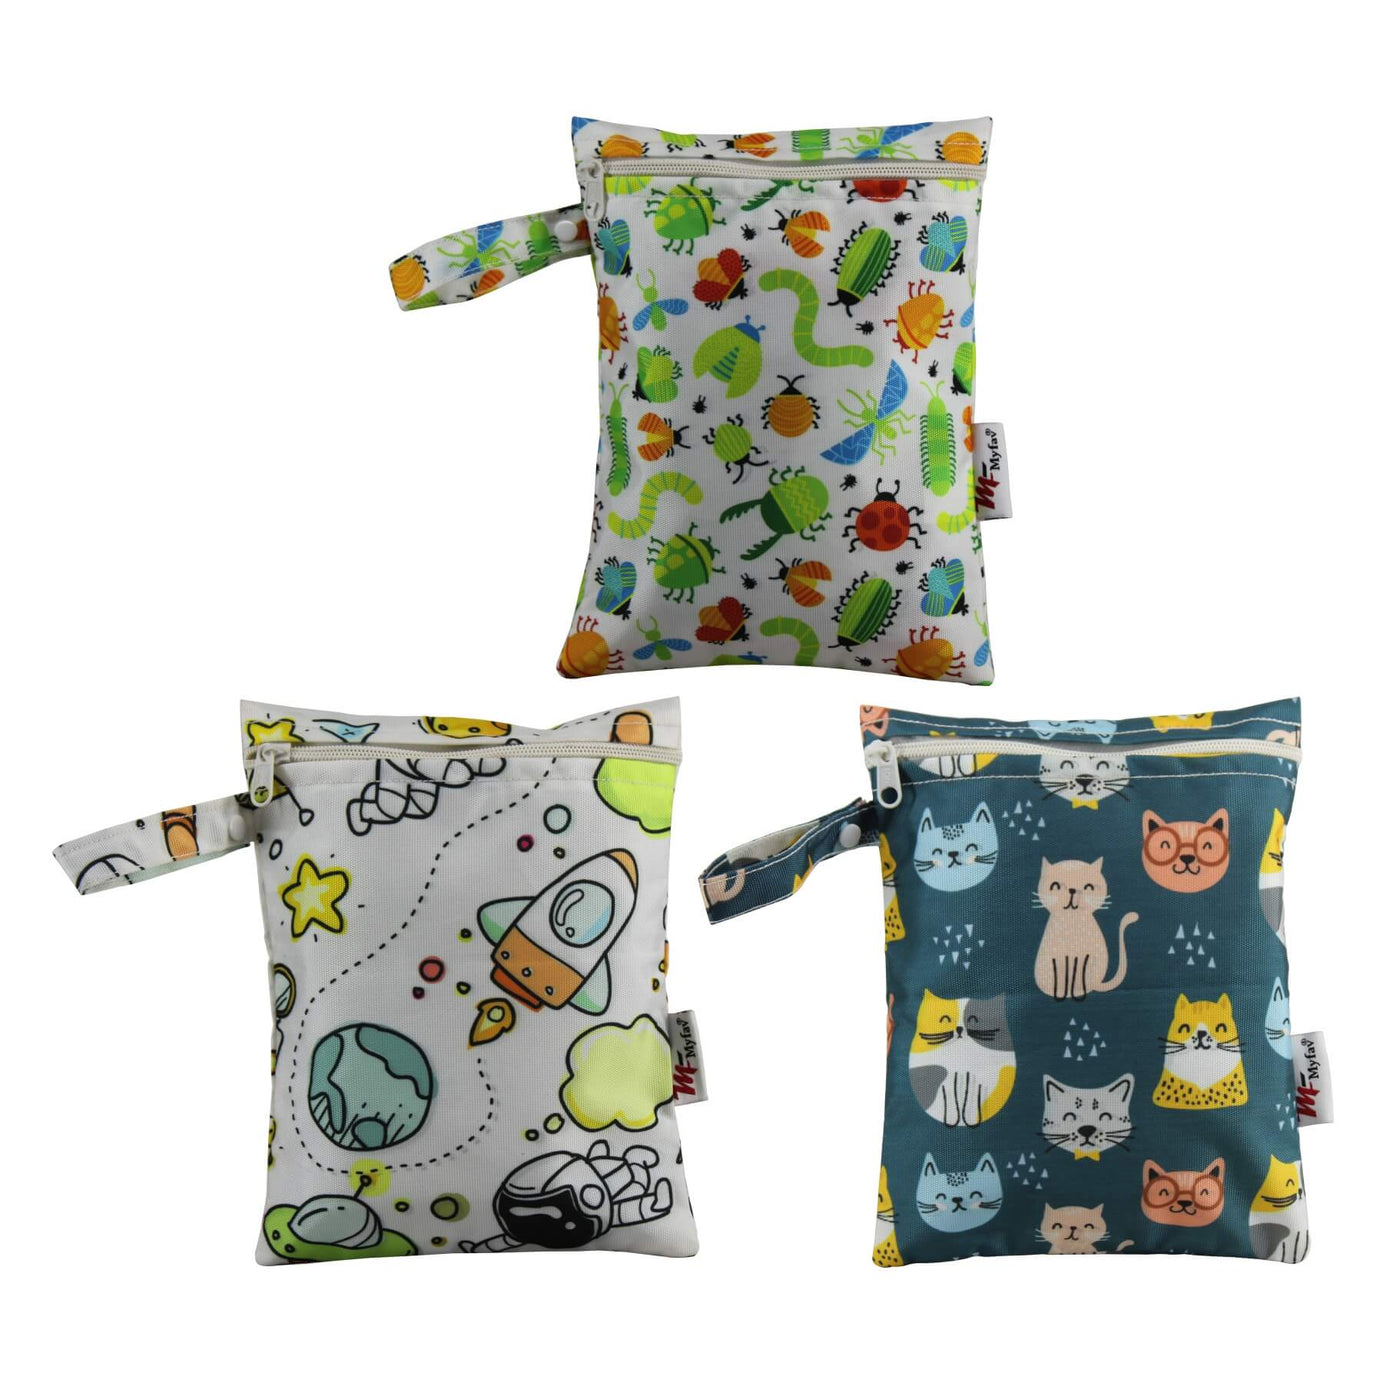 My Fav Spiral Print Multiutility Wet Dry Pouch/Diaper Bag/Travel Pouch/Travel Kit - Pack of 3